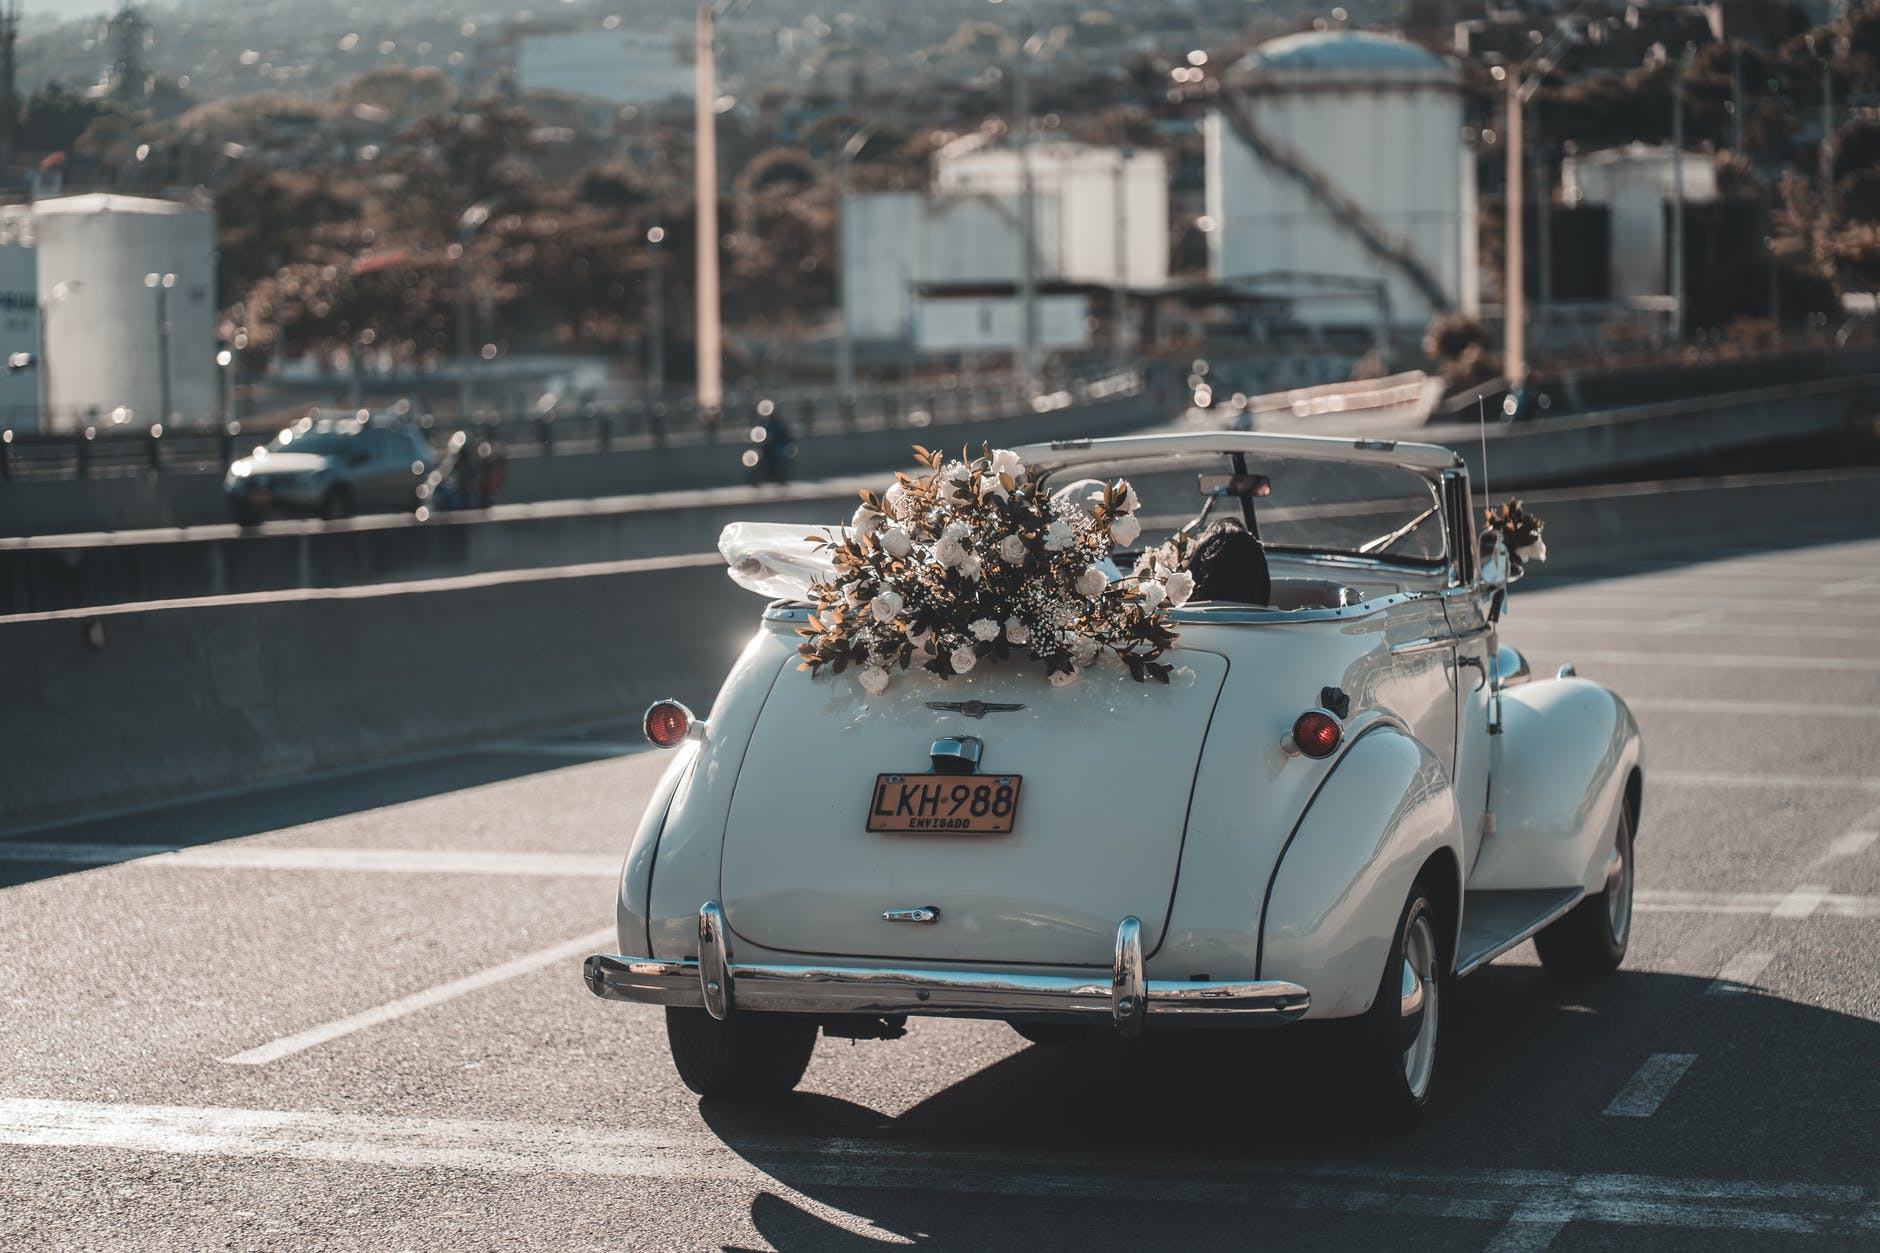 He drove off with the woman in a vintage car. | Source: Pexels